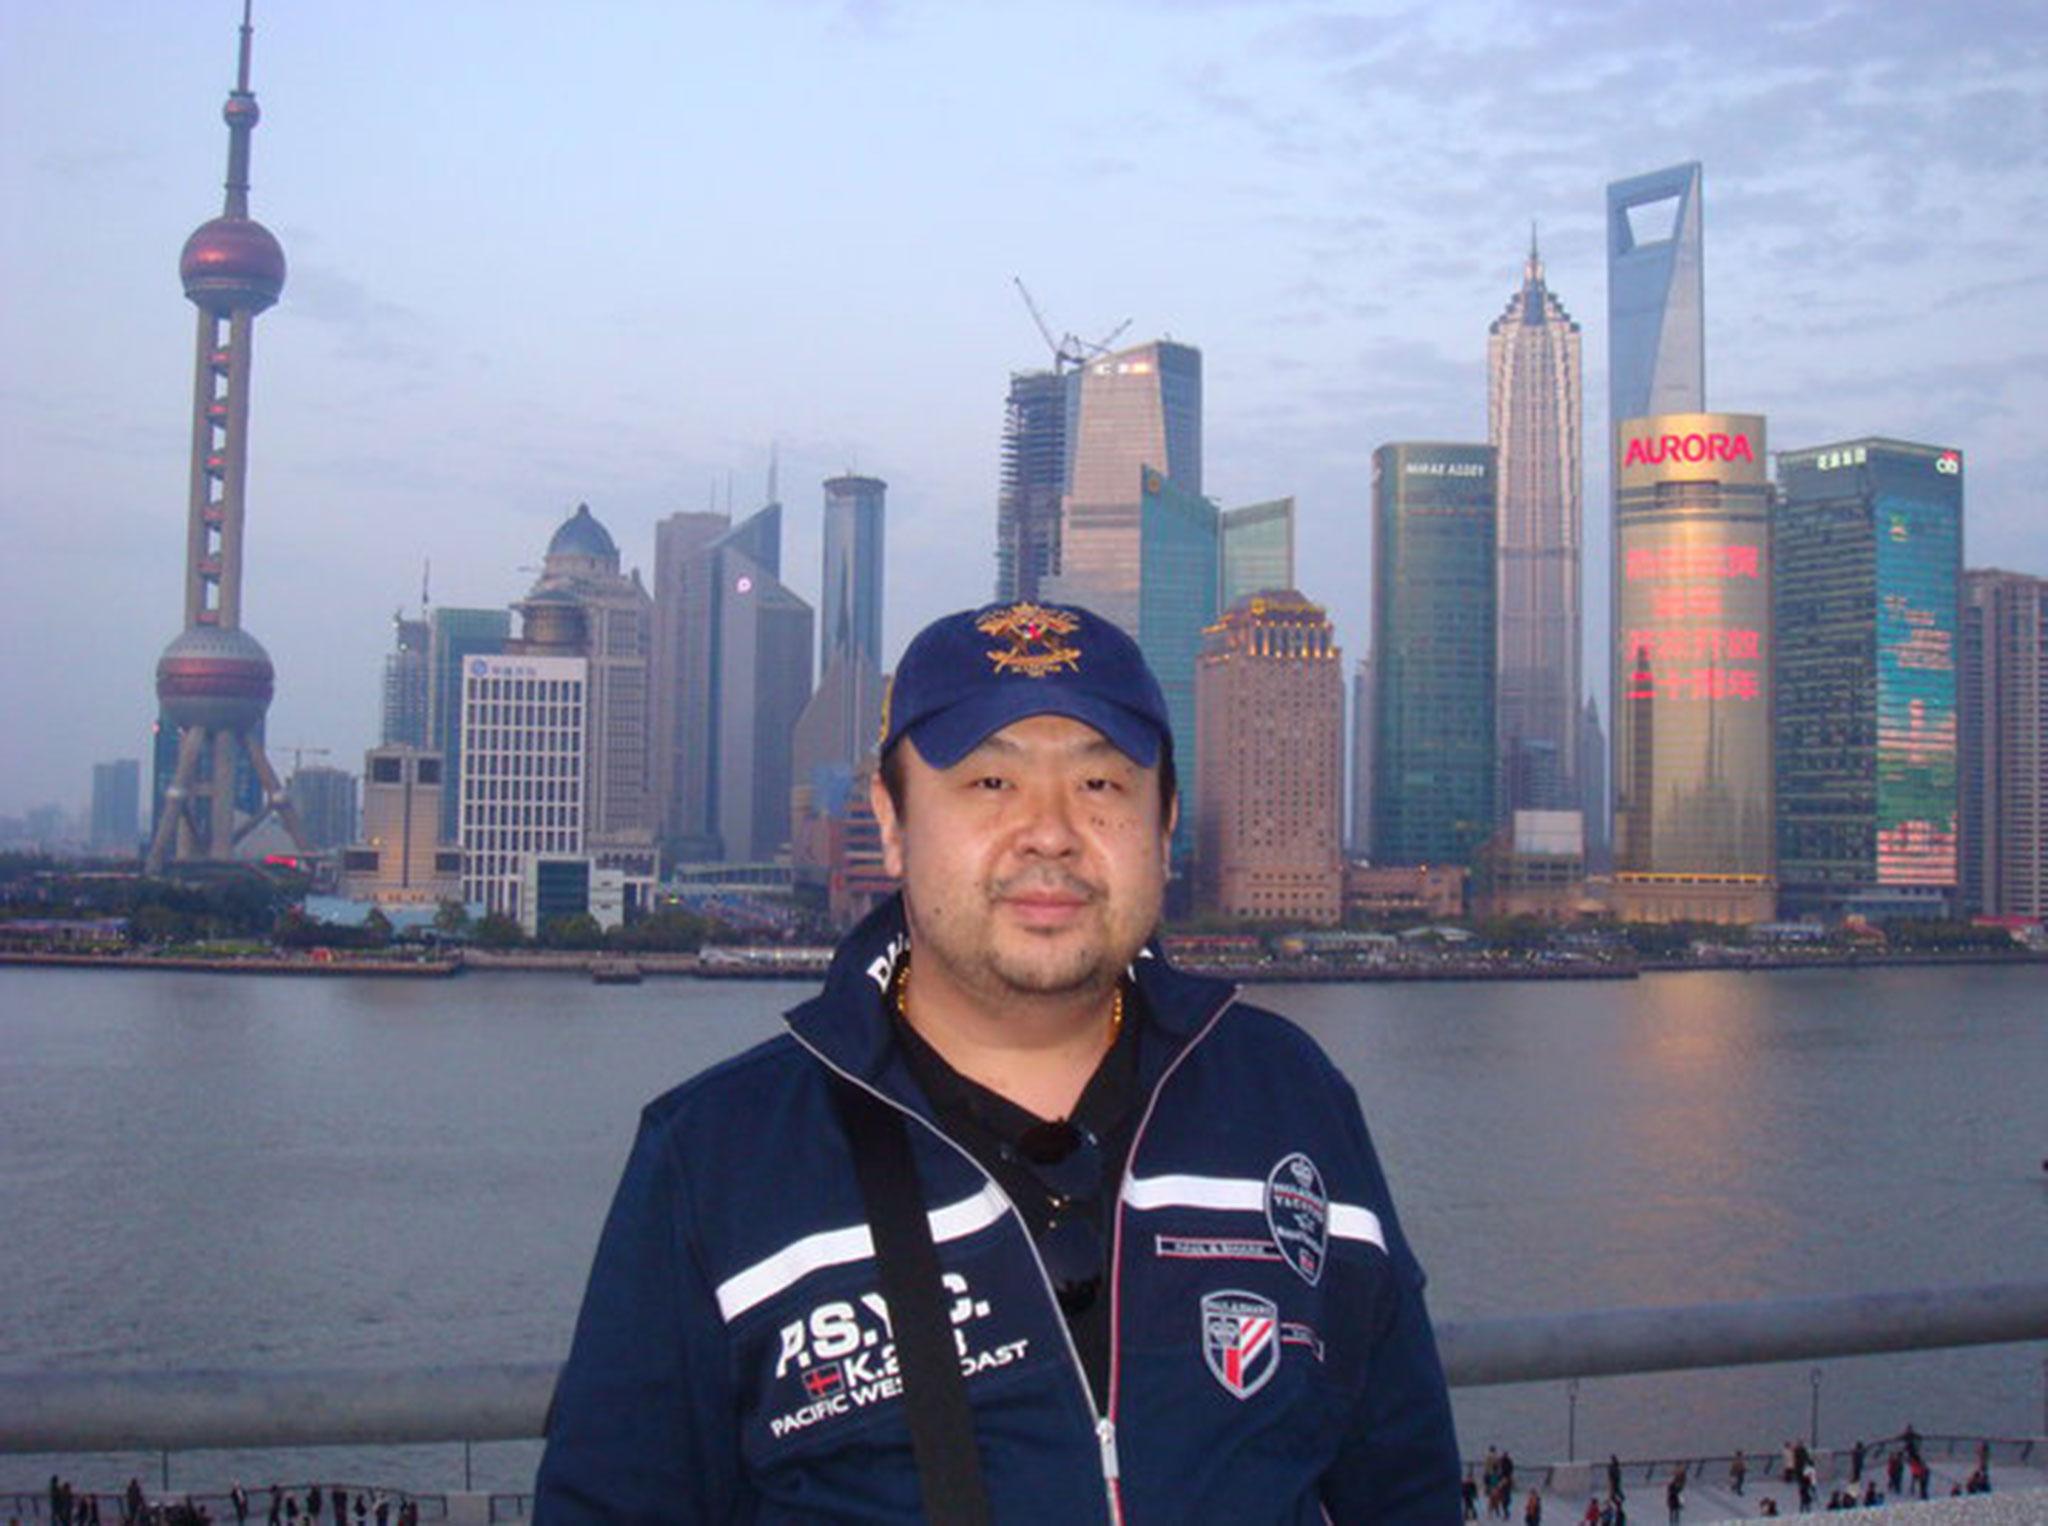 A photo believed to show Kim Jong-nam in Shanghai, posted in Facebook in 2010